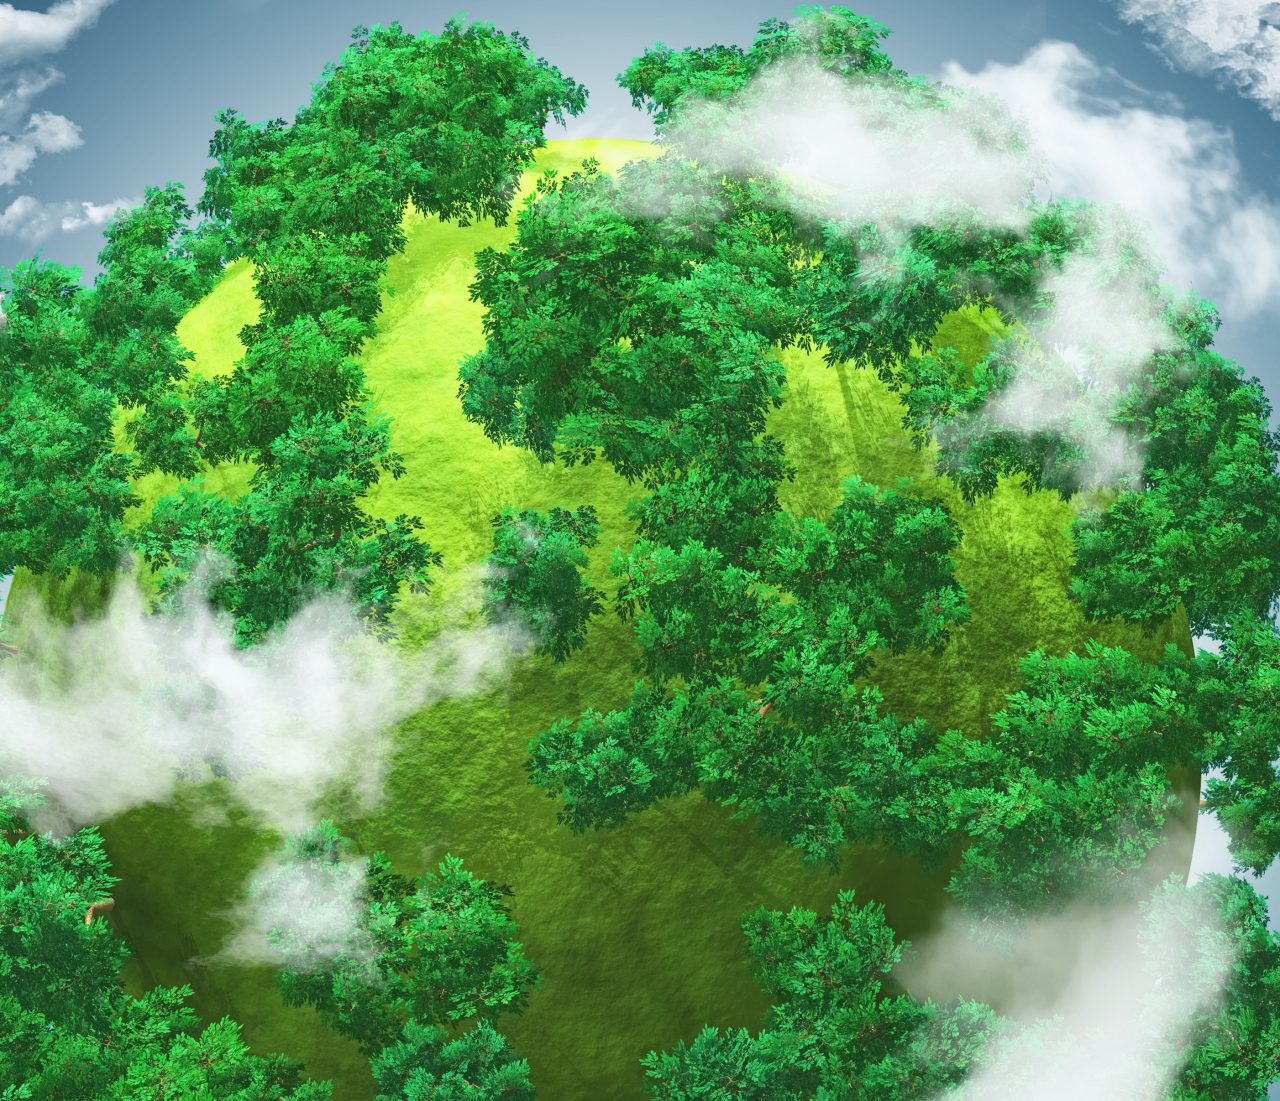 3D render of a grassy globe with trees against a blue cloudy sky